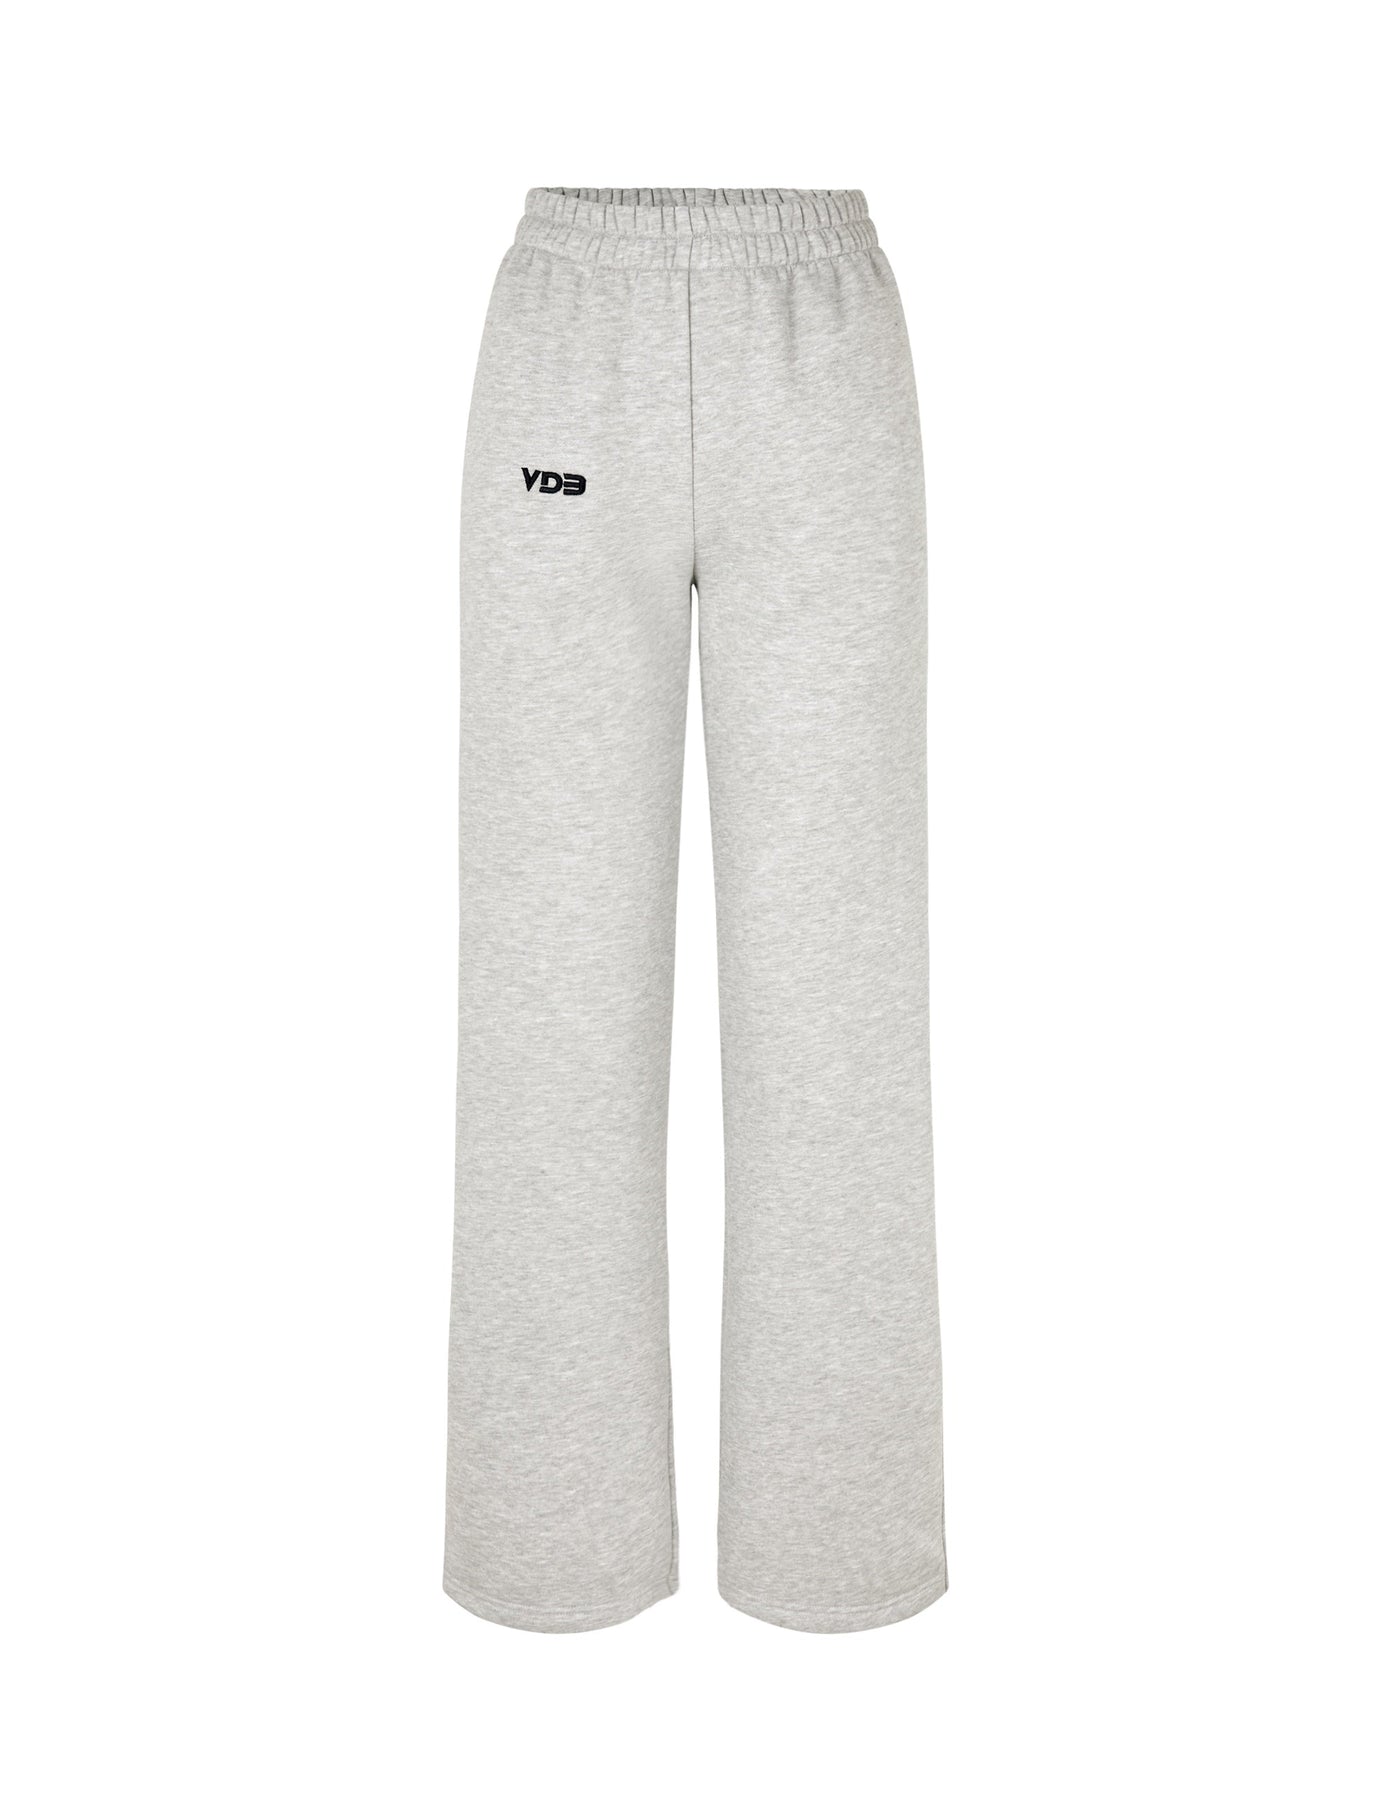 Sweatpants  Buy the popular joggers for women from VDB